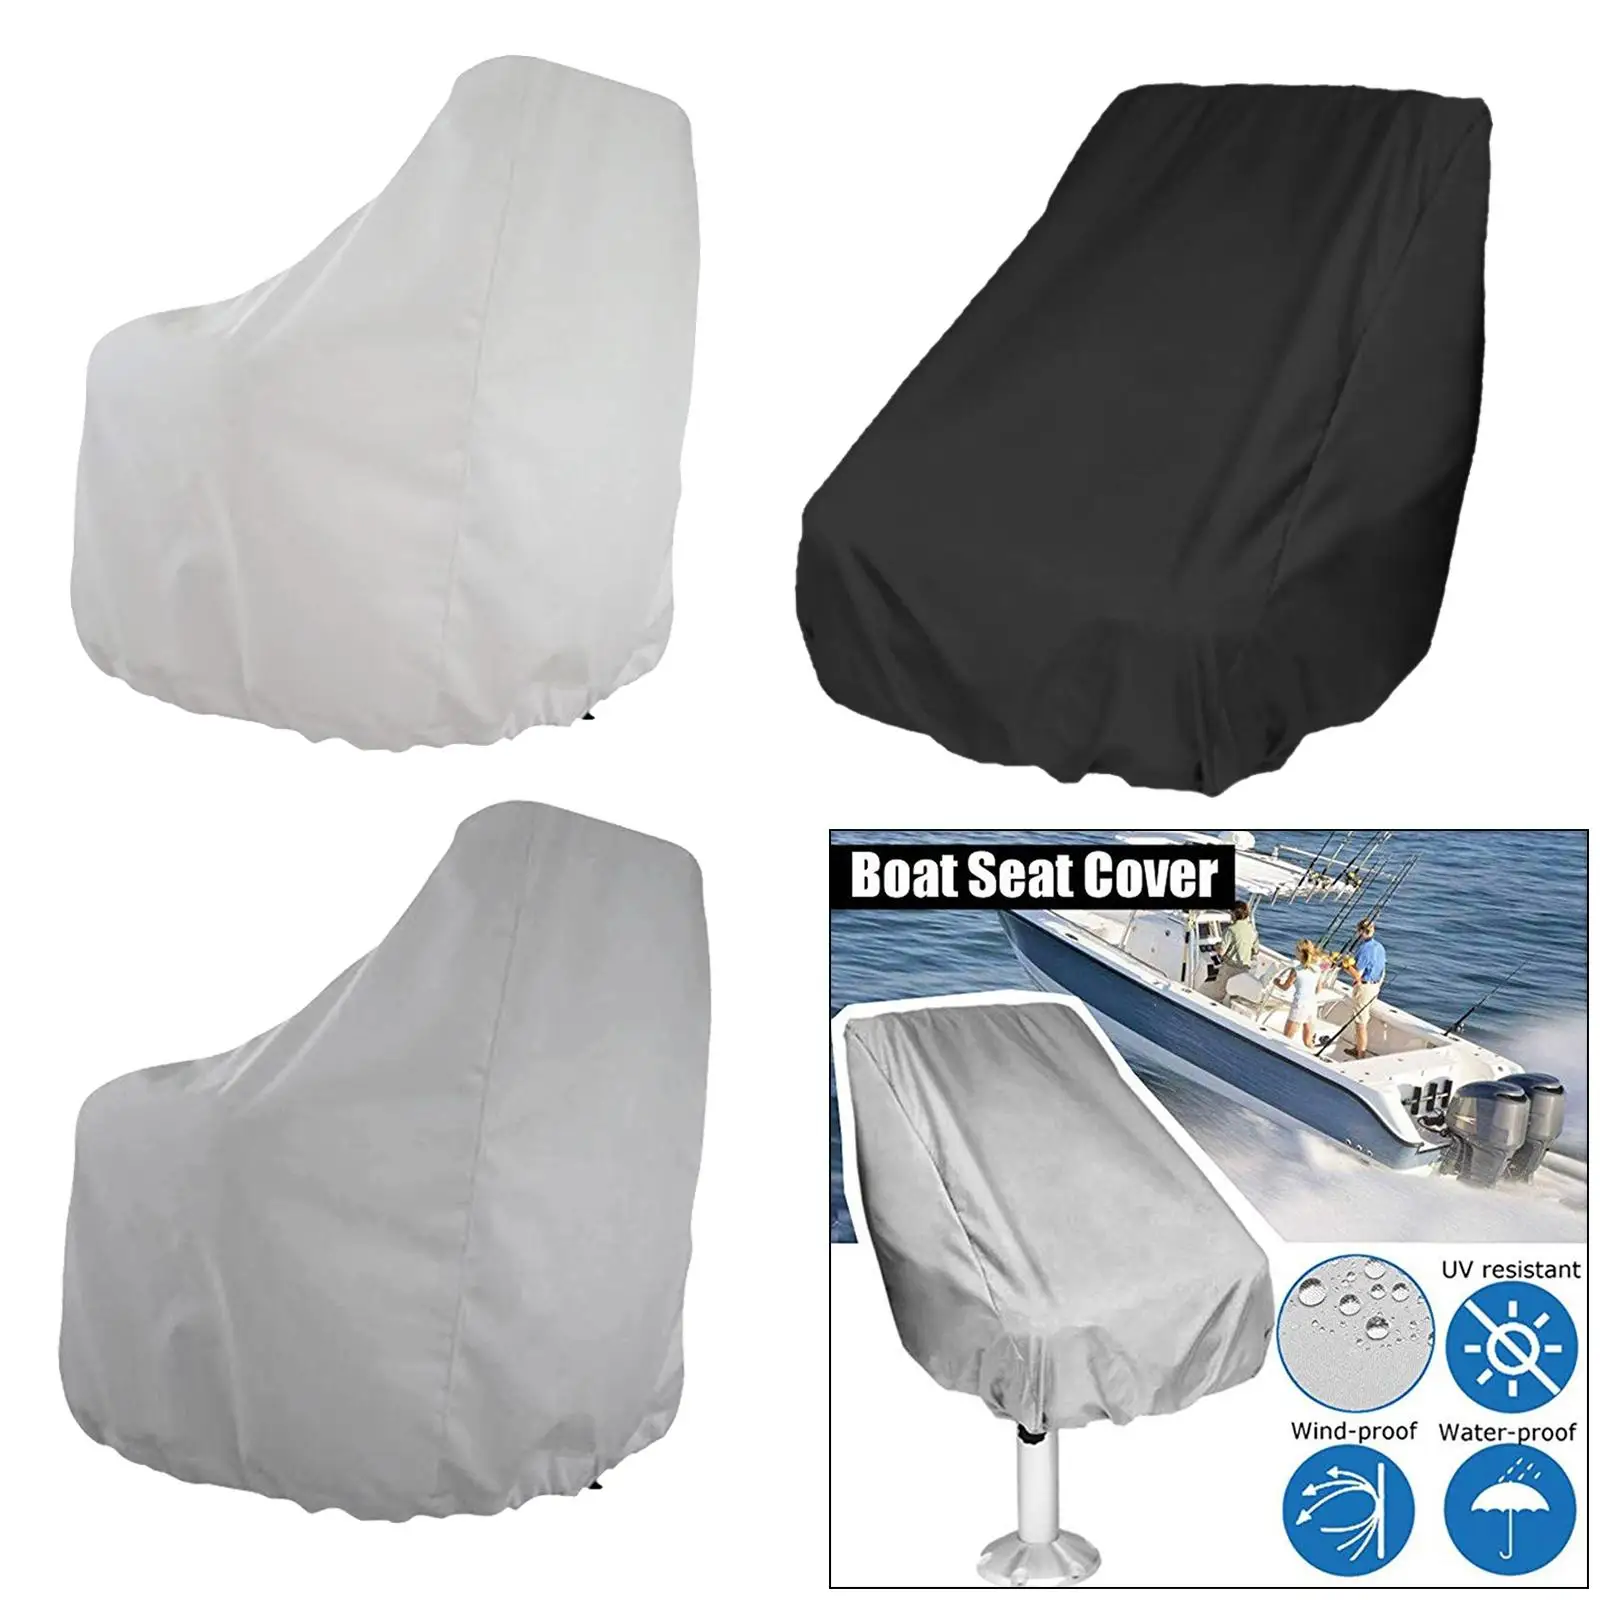 Boat Seat Cover, Collapsible Waterproof, Weatherproof High-performance